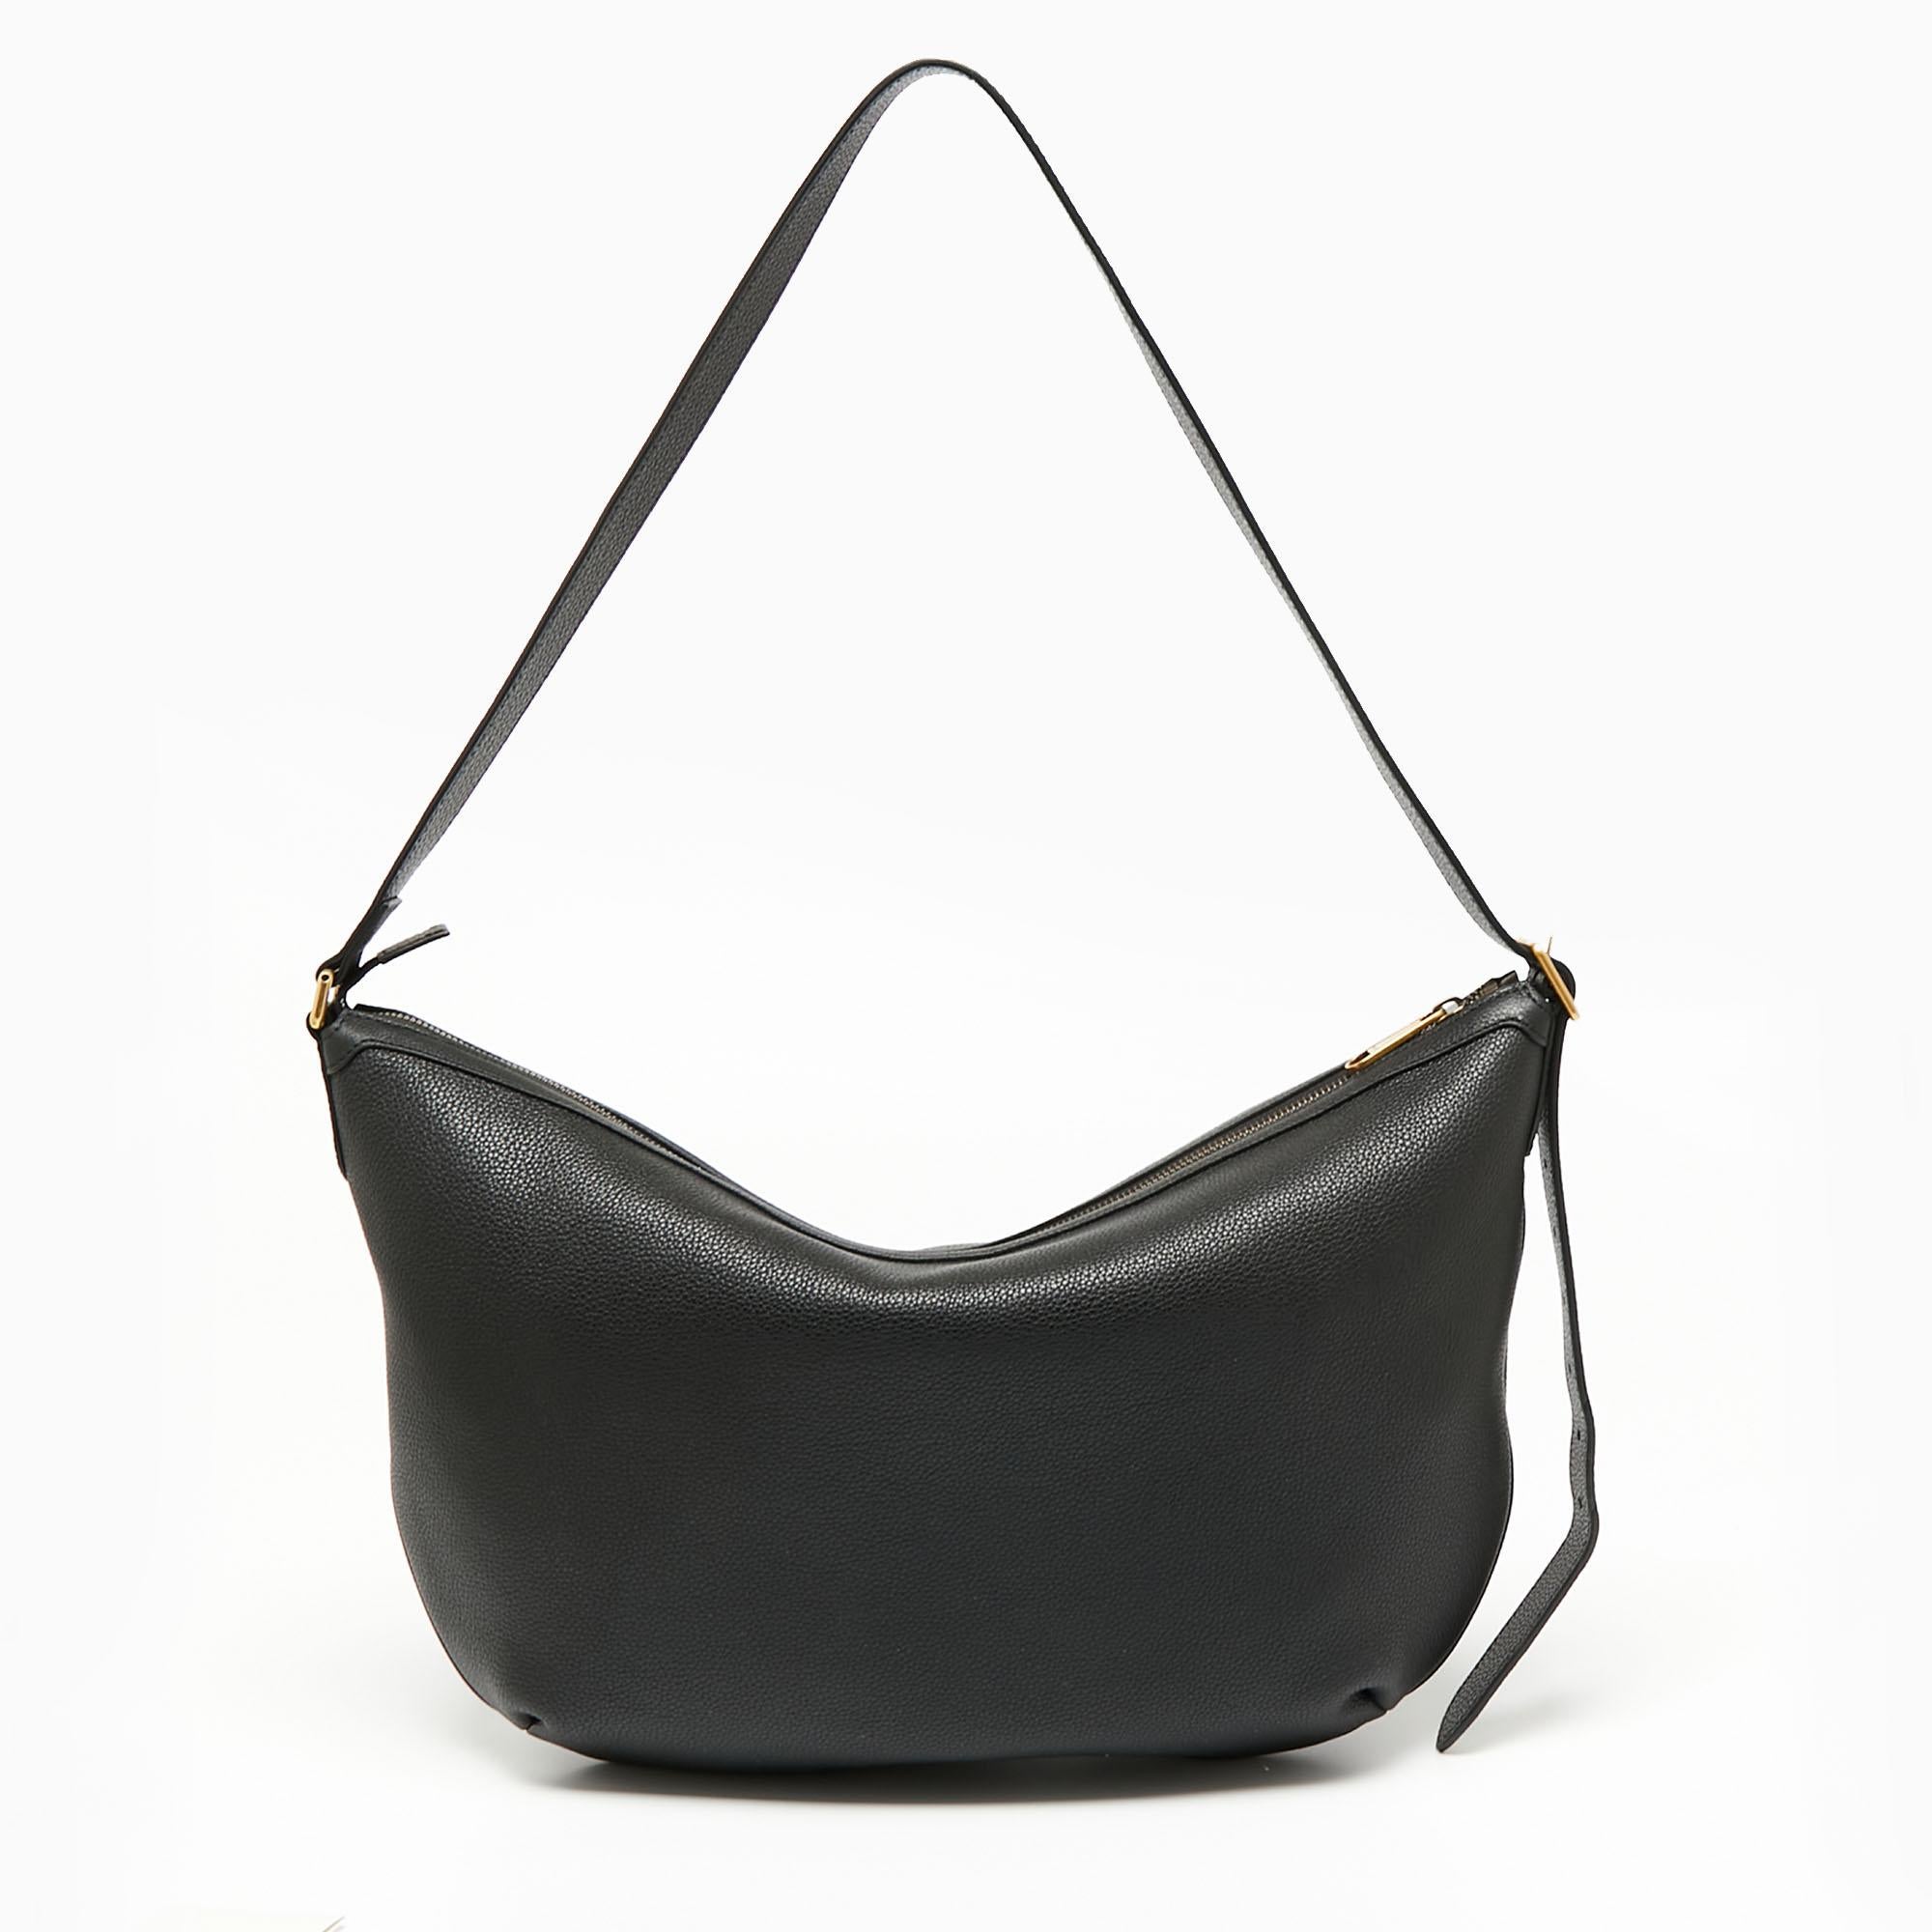 This iconic 'Half Moon' hobo from the house of Gucci takes its name after its crescent shape. Impeccably crafted from leather, the bag features logo on the front This marvelous hobo is ideal for a day or an evening outing.

Includes: Original